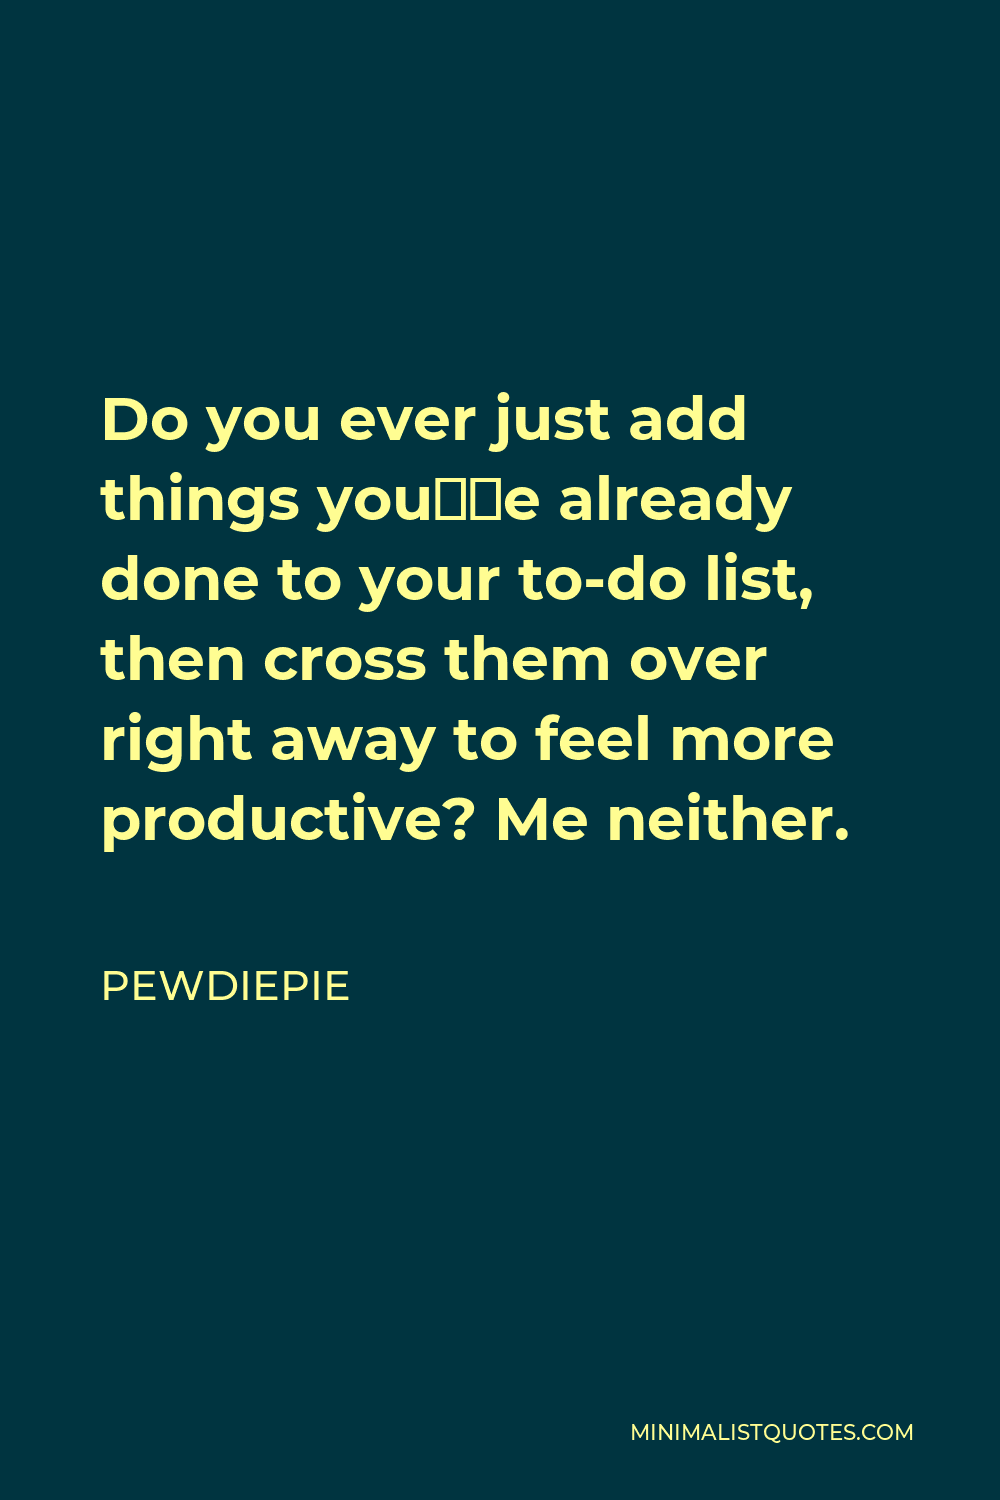 PewDiePie Quote - Do you ever just add things you’ve already done to your to-do list, then cross them over right away to feel more productive? Me neither.